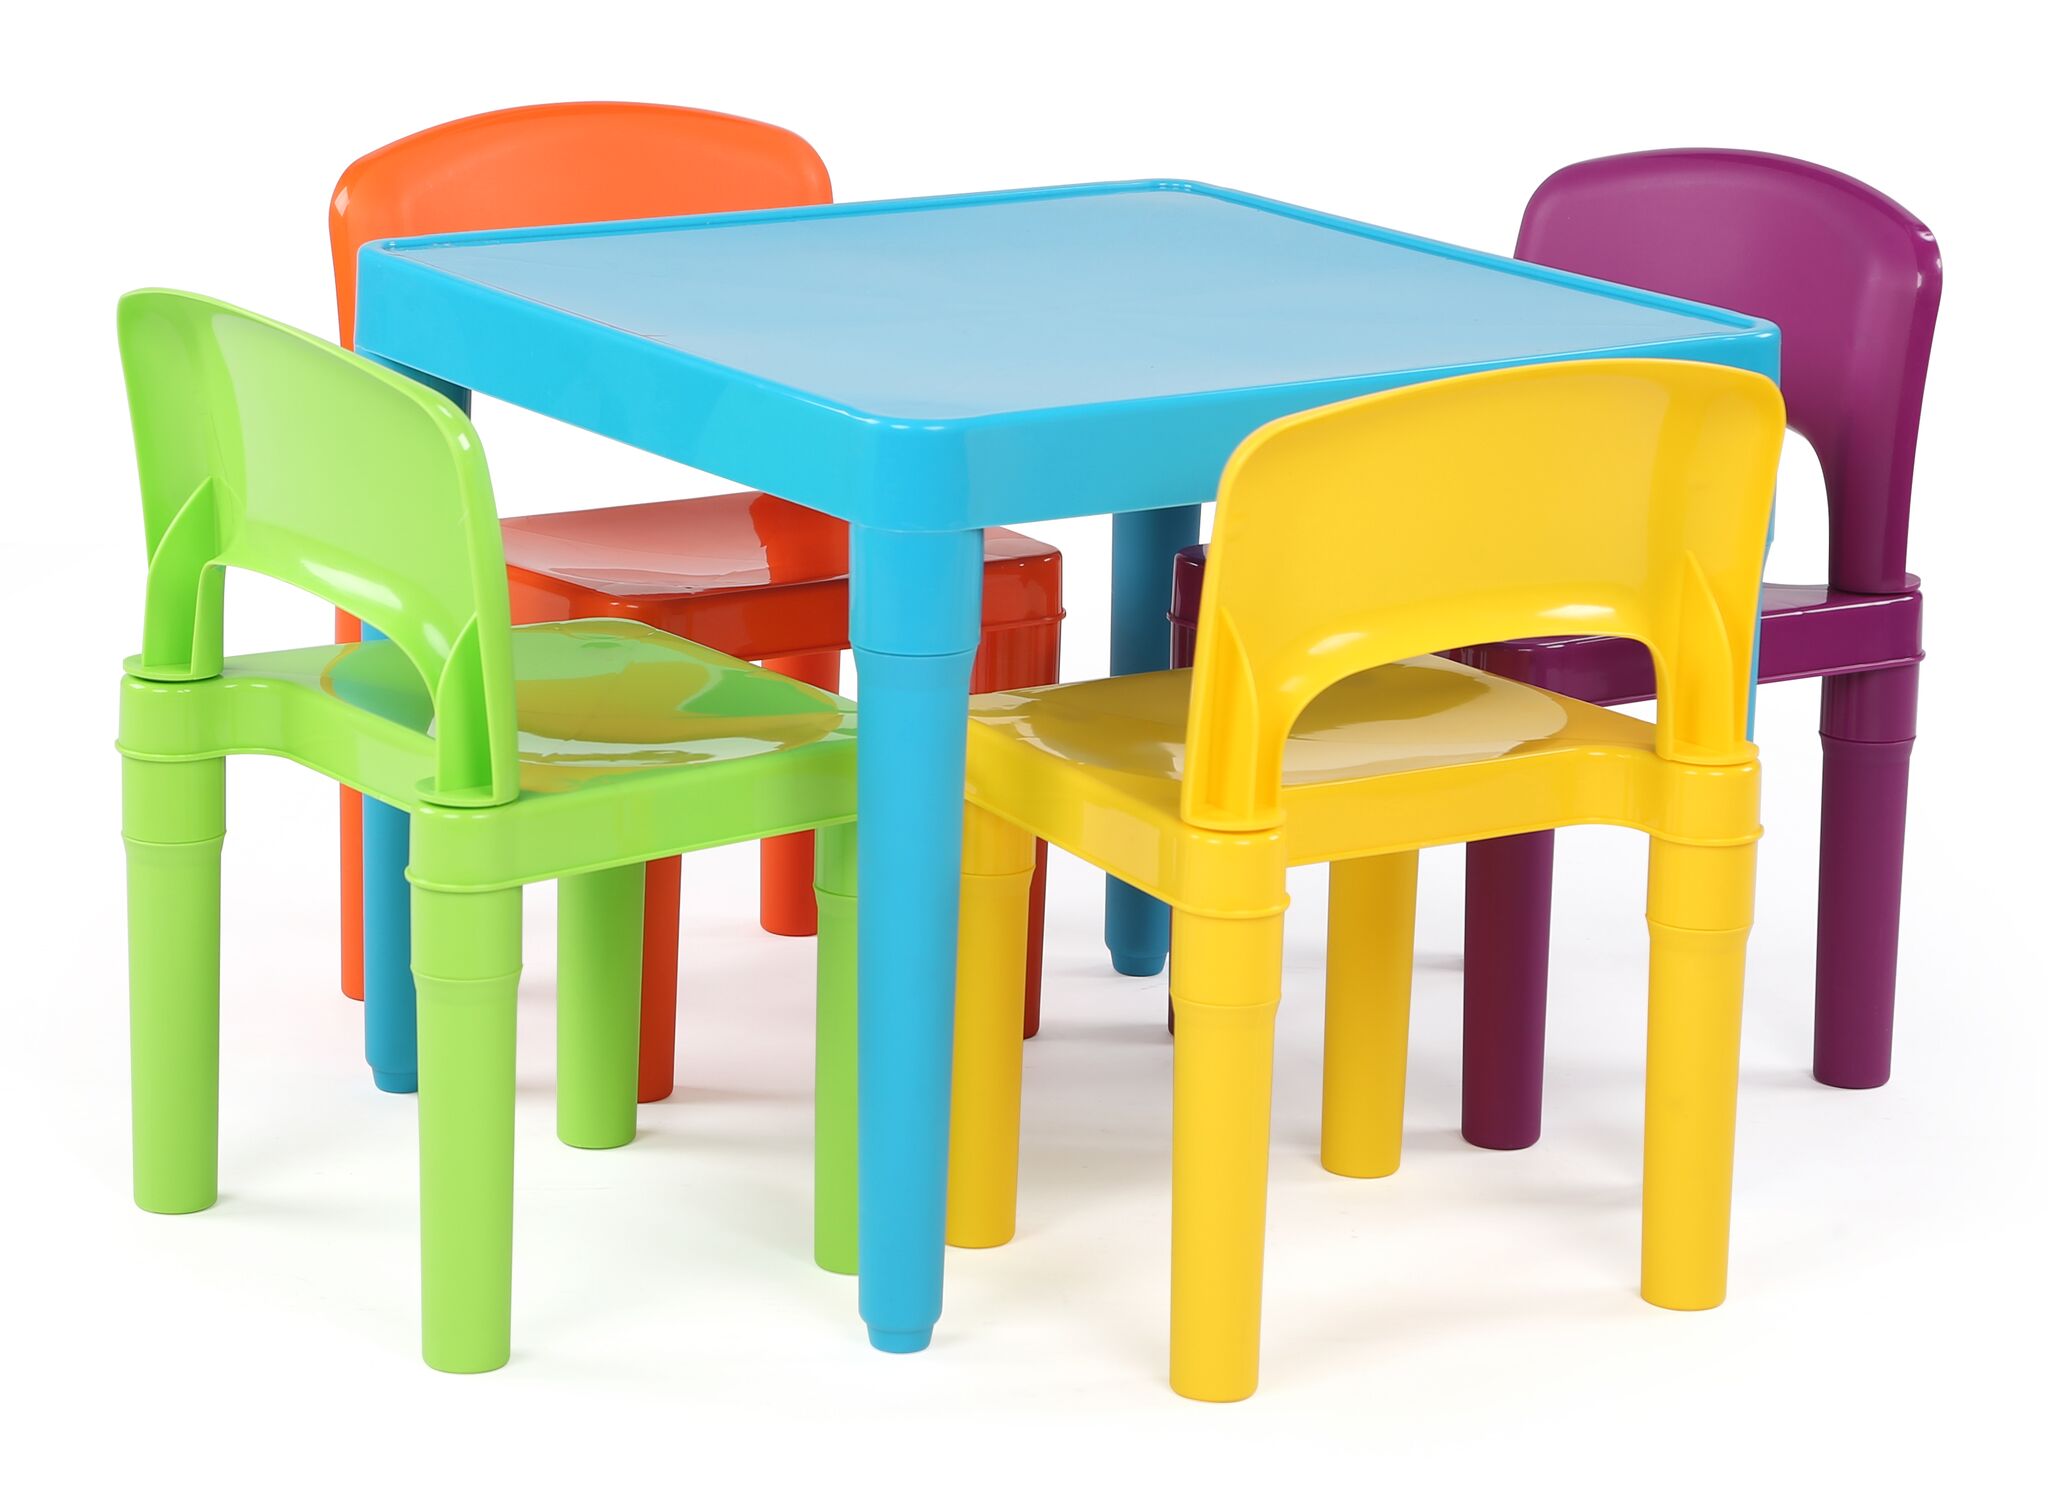 Humble Crew Kids Lightweight Plastic Table and 4 Chairs Set, Square, Blue/Orange/Green/Yellow/Purple - image 1 of 6